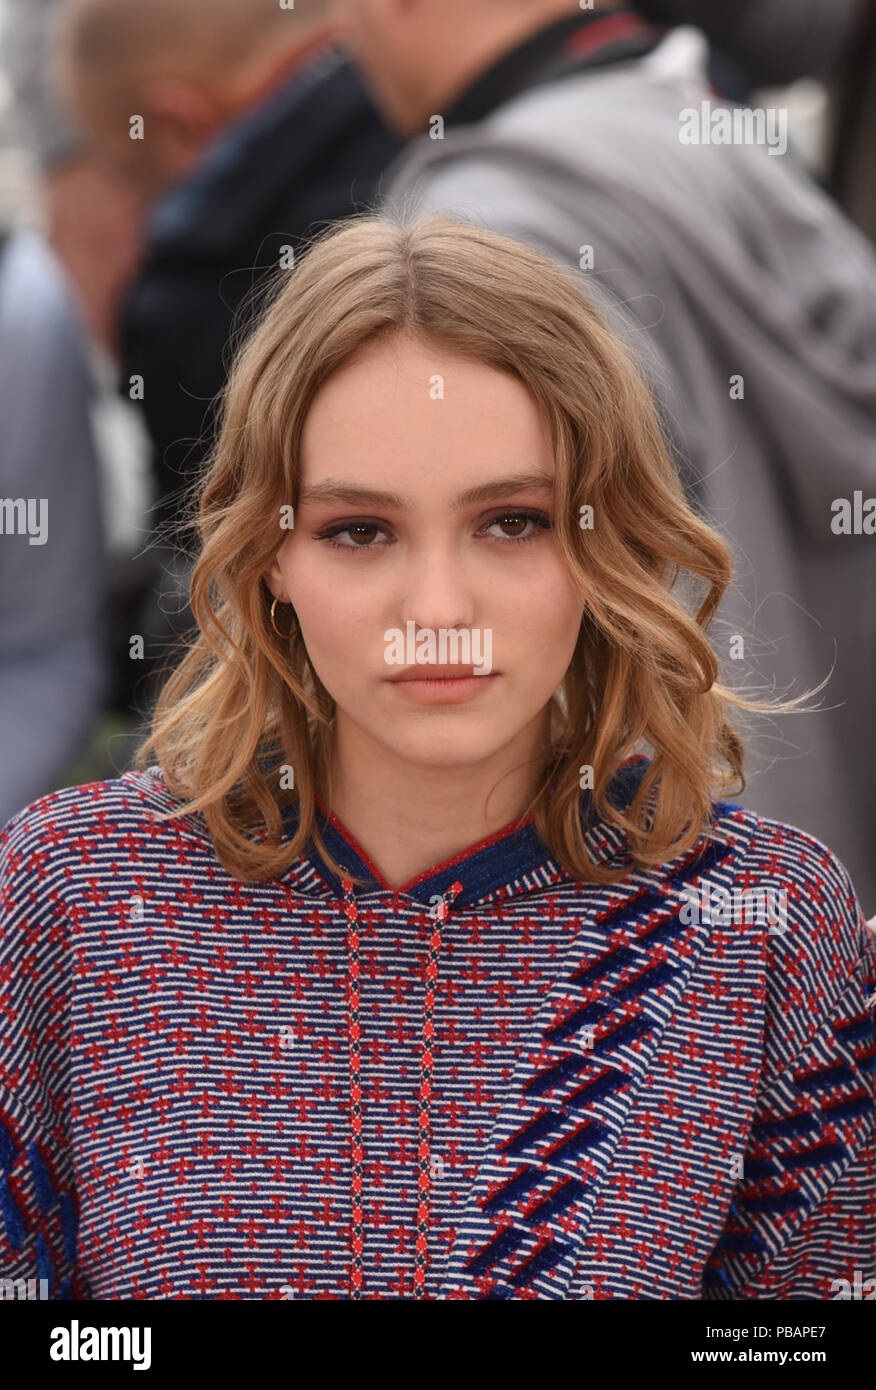 May 13, 2016 - Cannes, France: Lily-Rose Depp attends the 'La Danseuse'  photocall during the 69th Cannes film festival. Lily-Rose Depp lors du  69eme Festival de Cannes. *** FRANCE OUT / NO